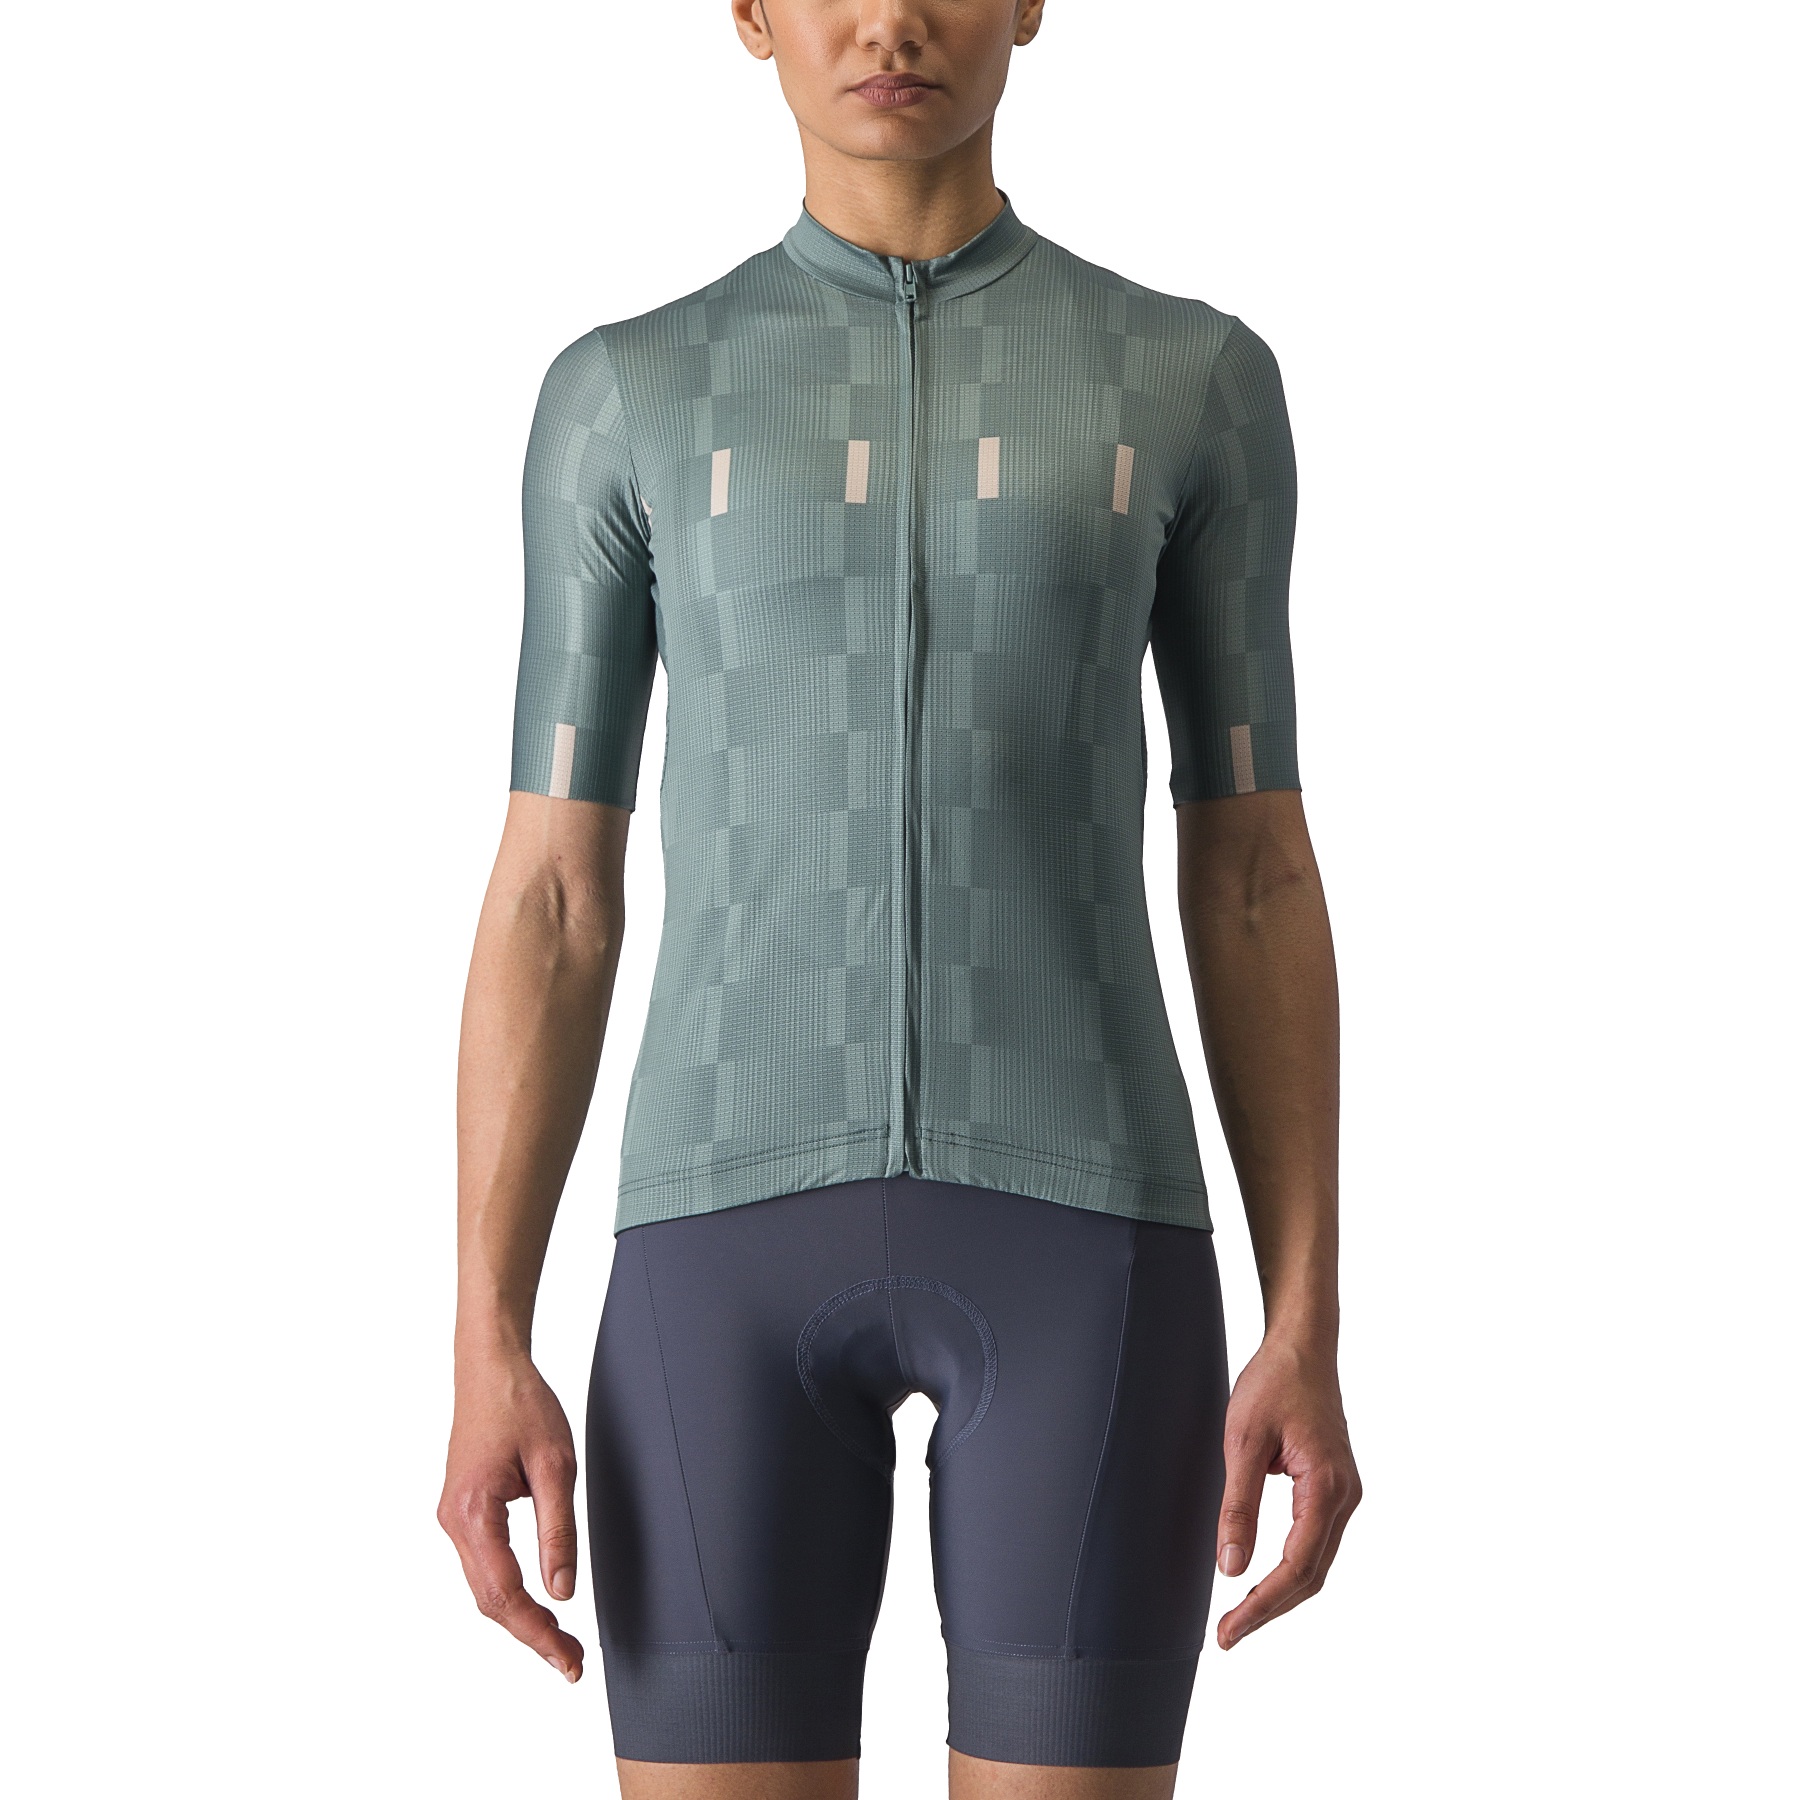 Picture of Castelli Dimensione Jersey Women - ocean teal/clay 308